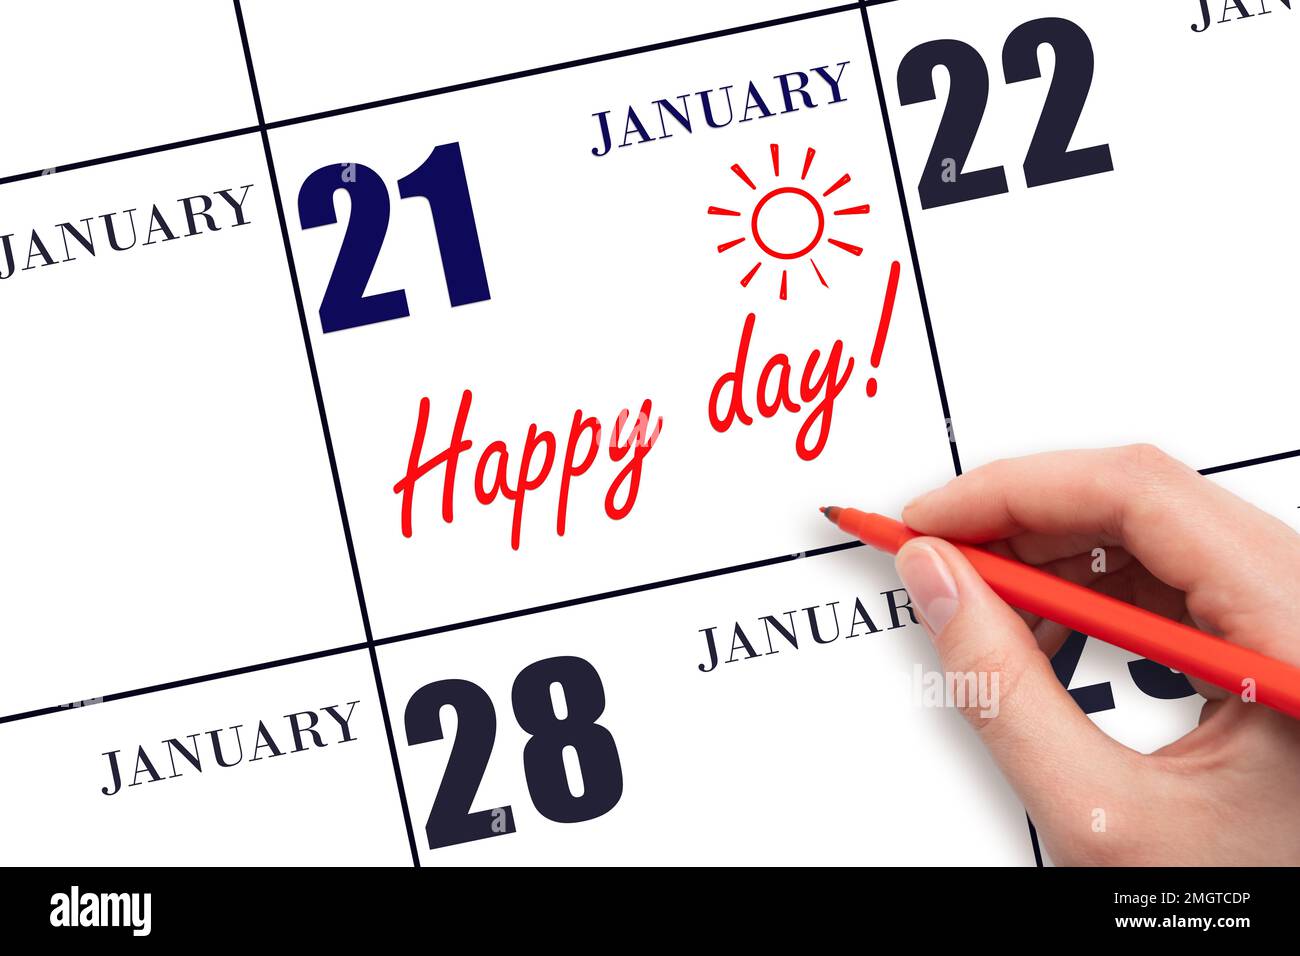 21st day of January. Hand writing the text HAPPY DAY and drawing the sun on the calendar date January 21. Save the date. Holiday. Motivation. Winter m Stock Photo